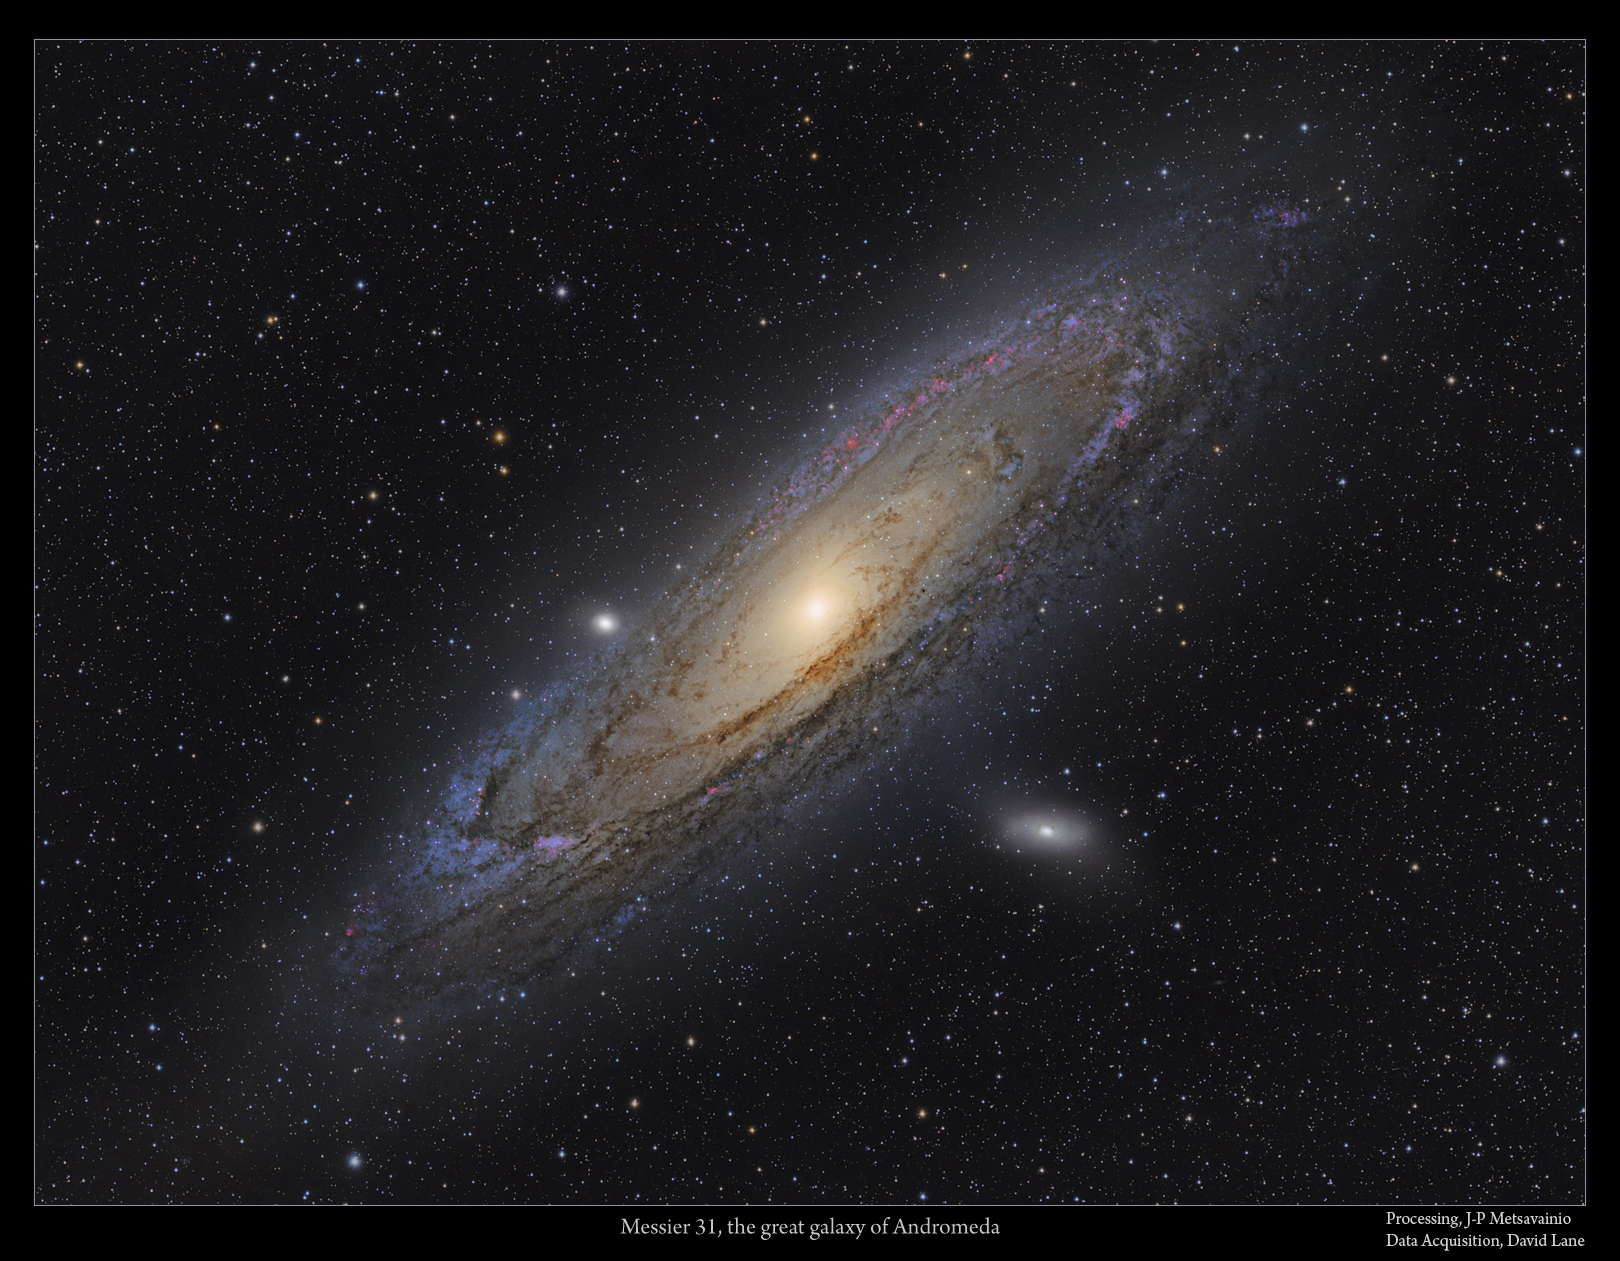 Astro Anarchy: Messier 31, M31, the Great Galaxy of Andromeda